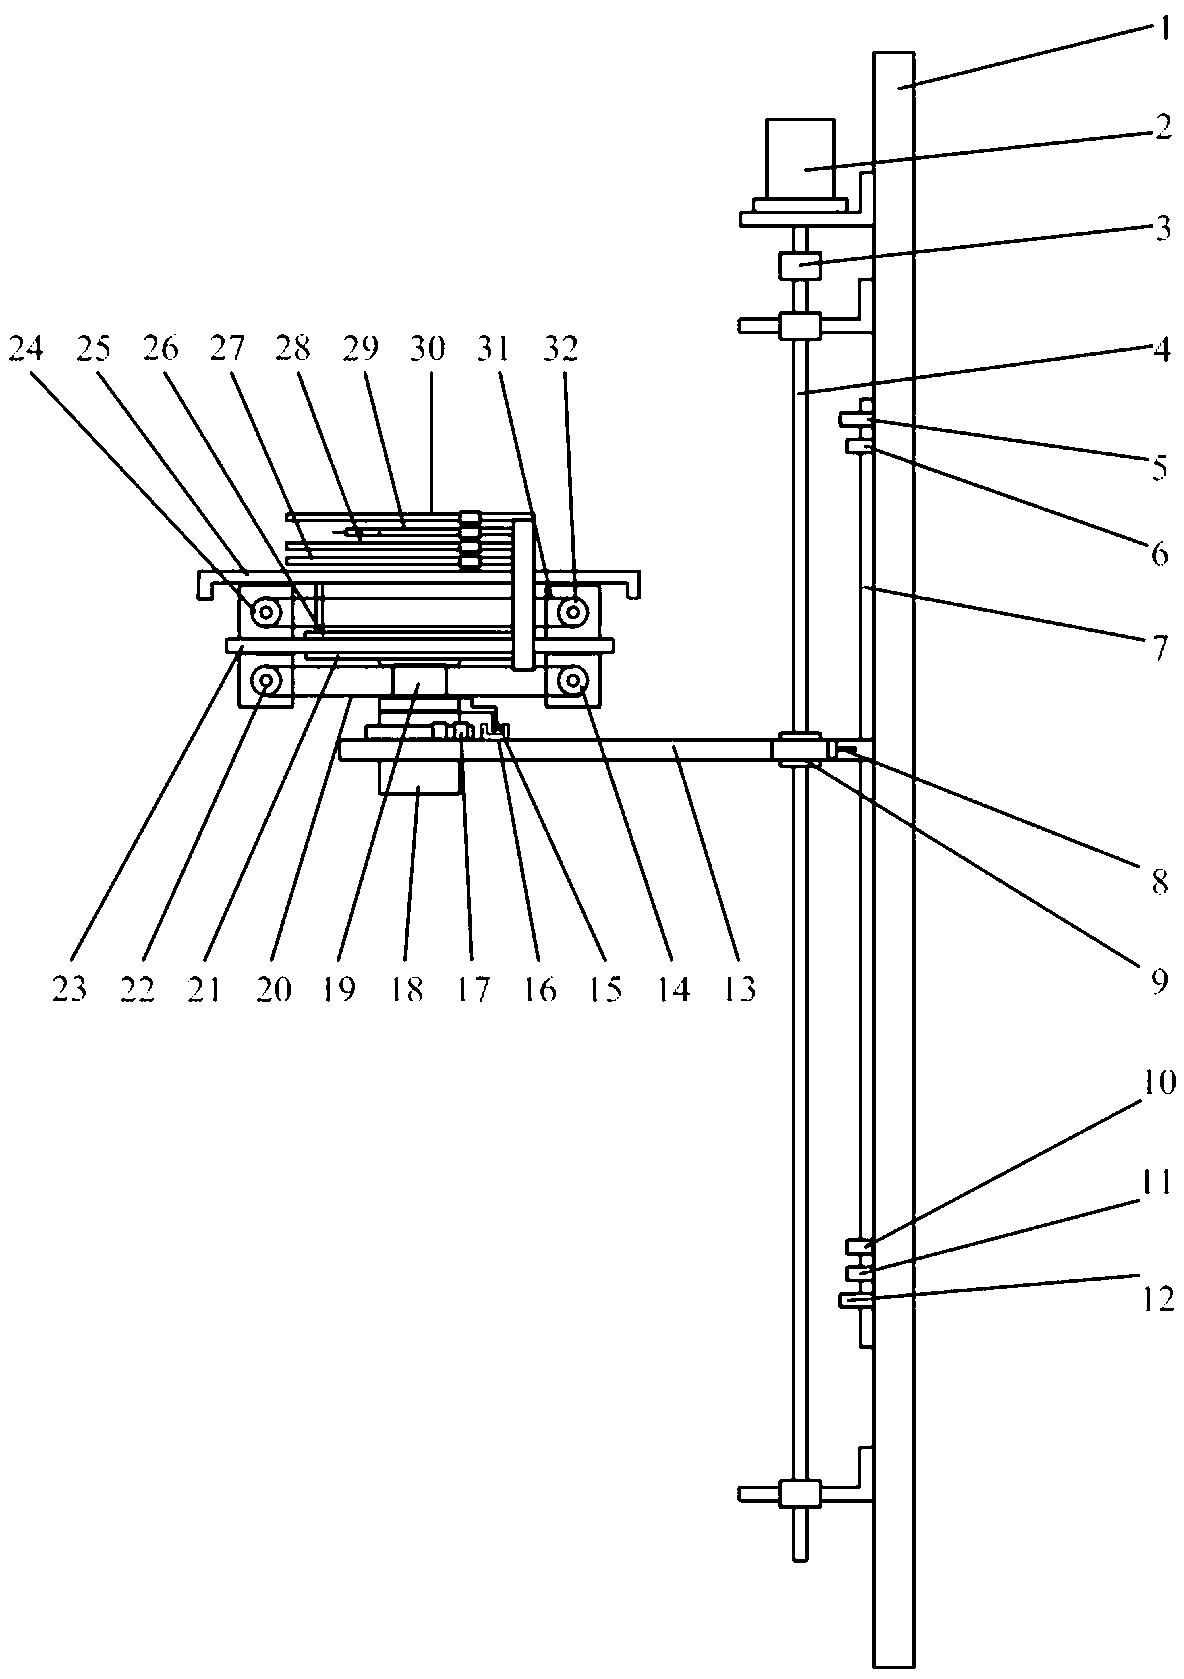 Device for delivering wafers processed in a plurality of chambers